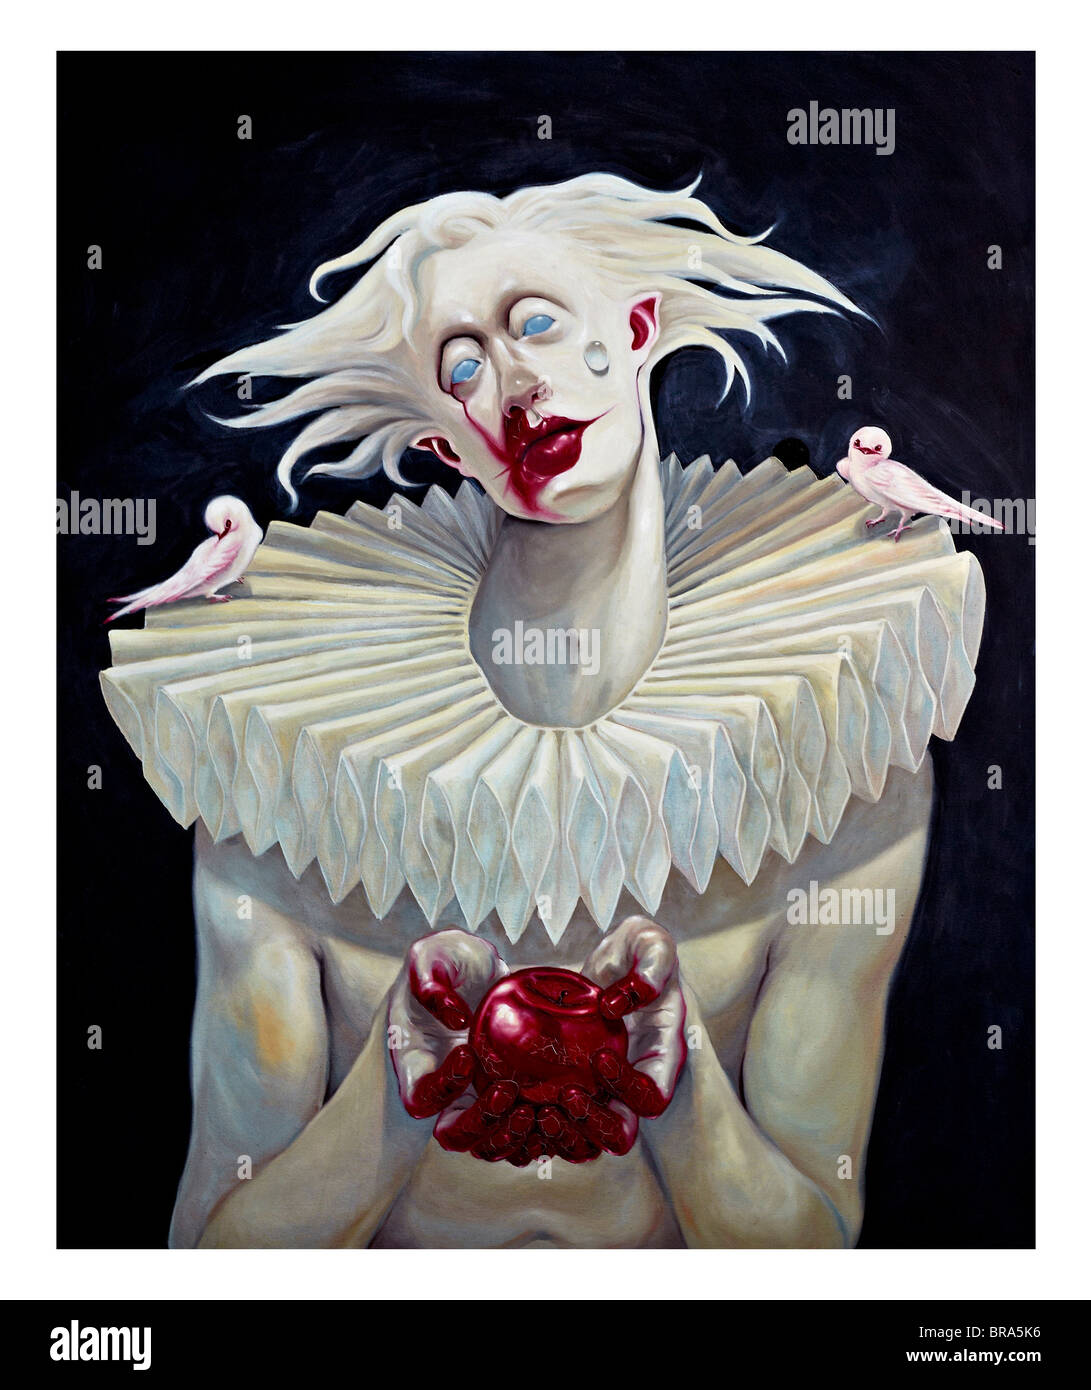 Surreal art. Surrealistic painting and fantasy art of a female white clown. Stock Photo